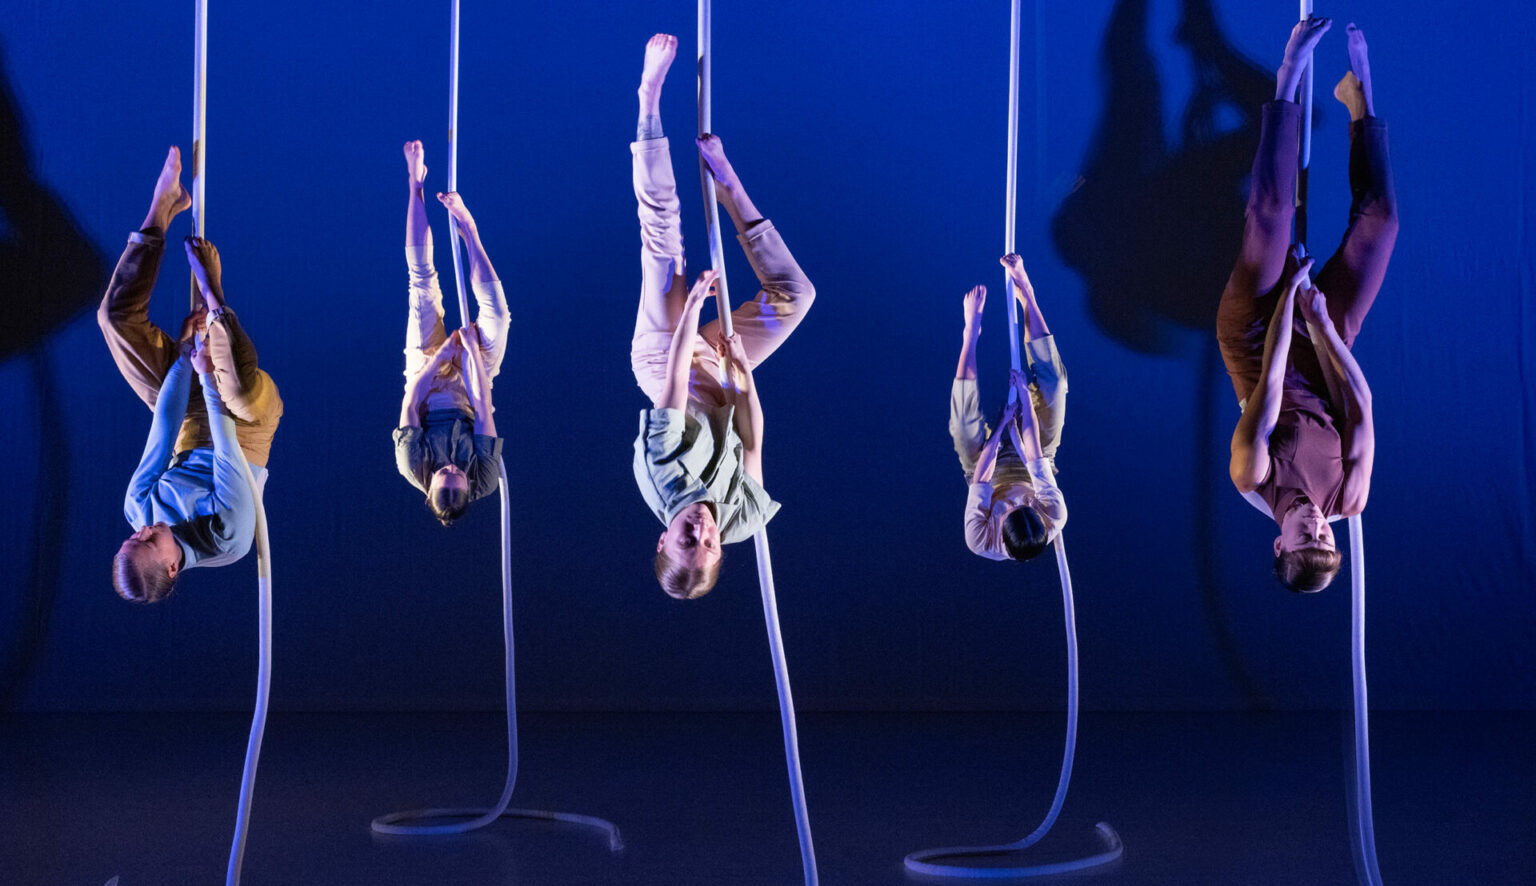 The performance “Axial Figures” at the dance theater Bora Bora.